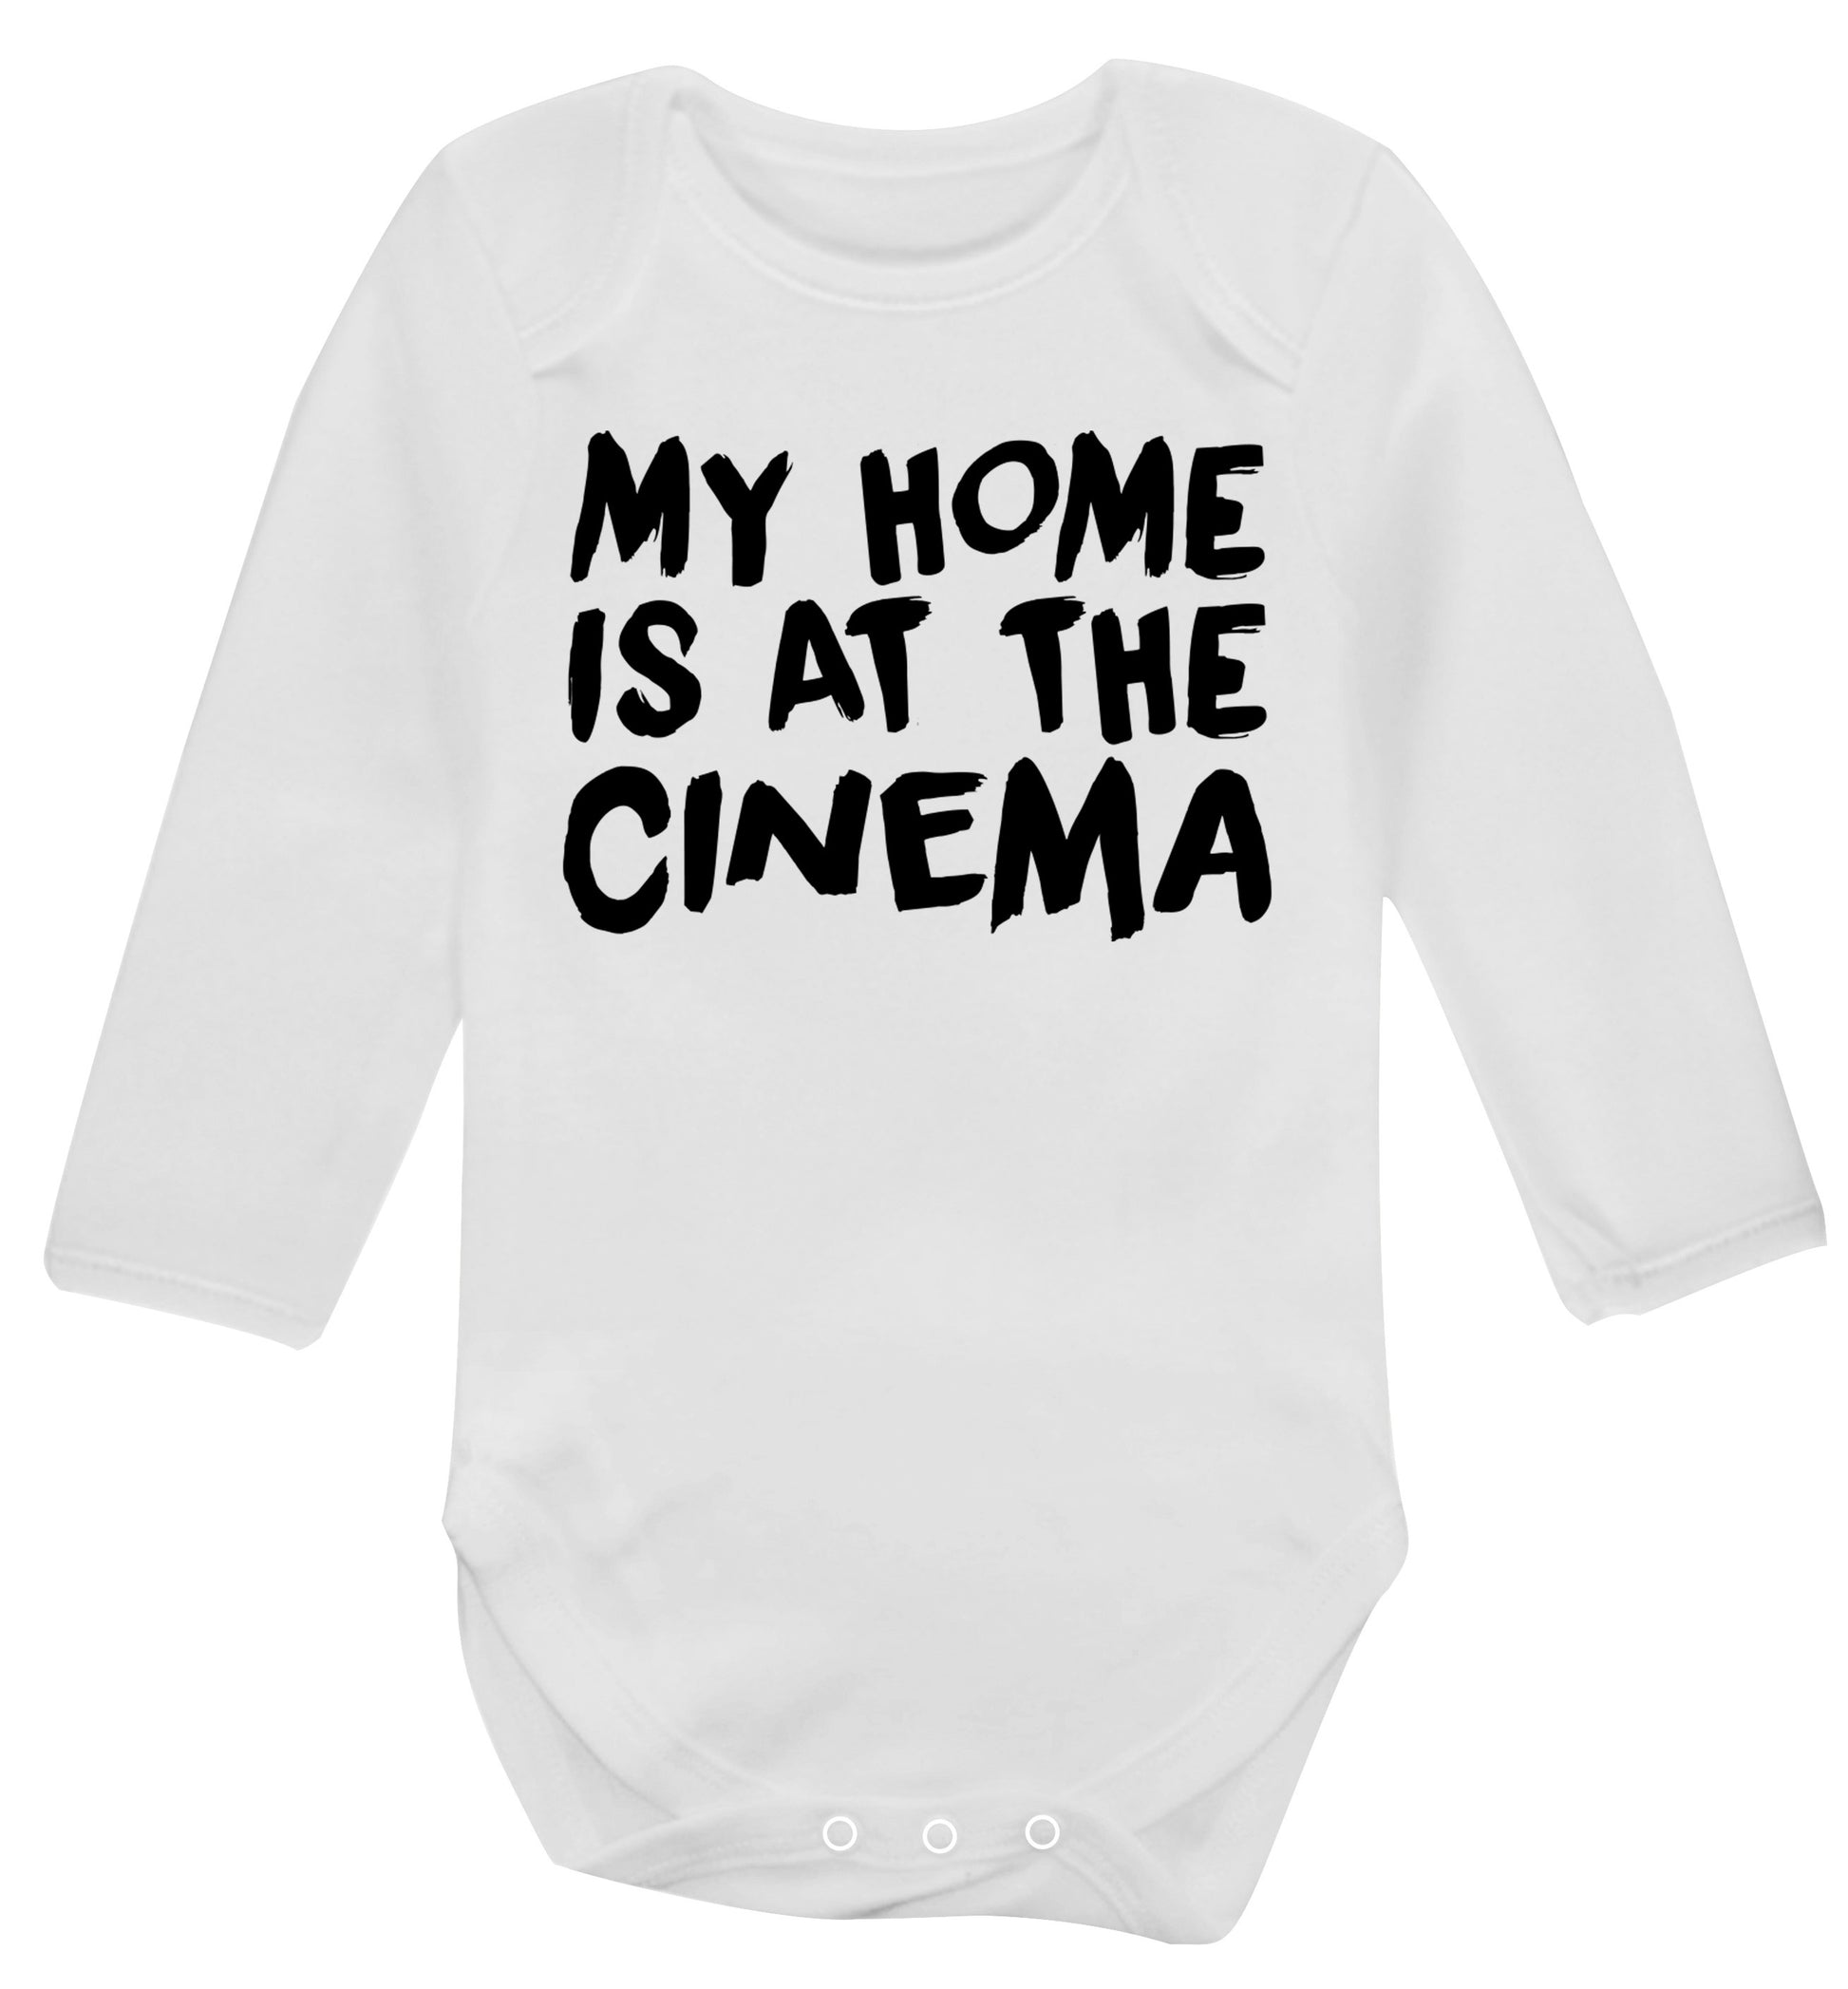 My home is at the cinema Baby Vest long sleeved white 6-12 months